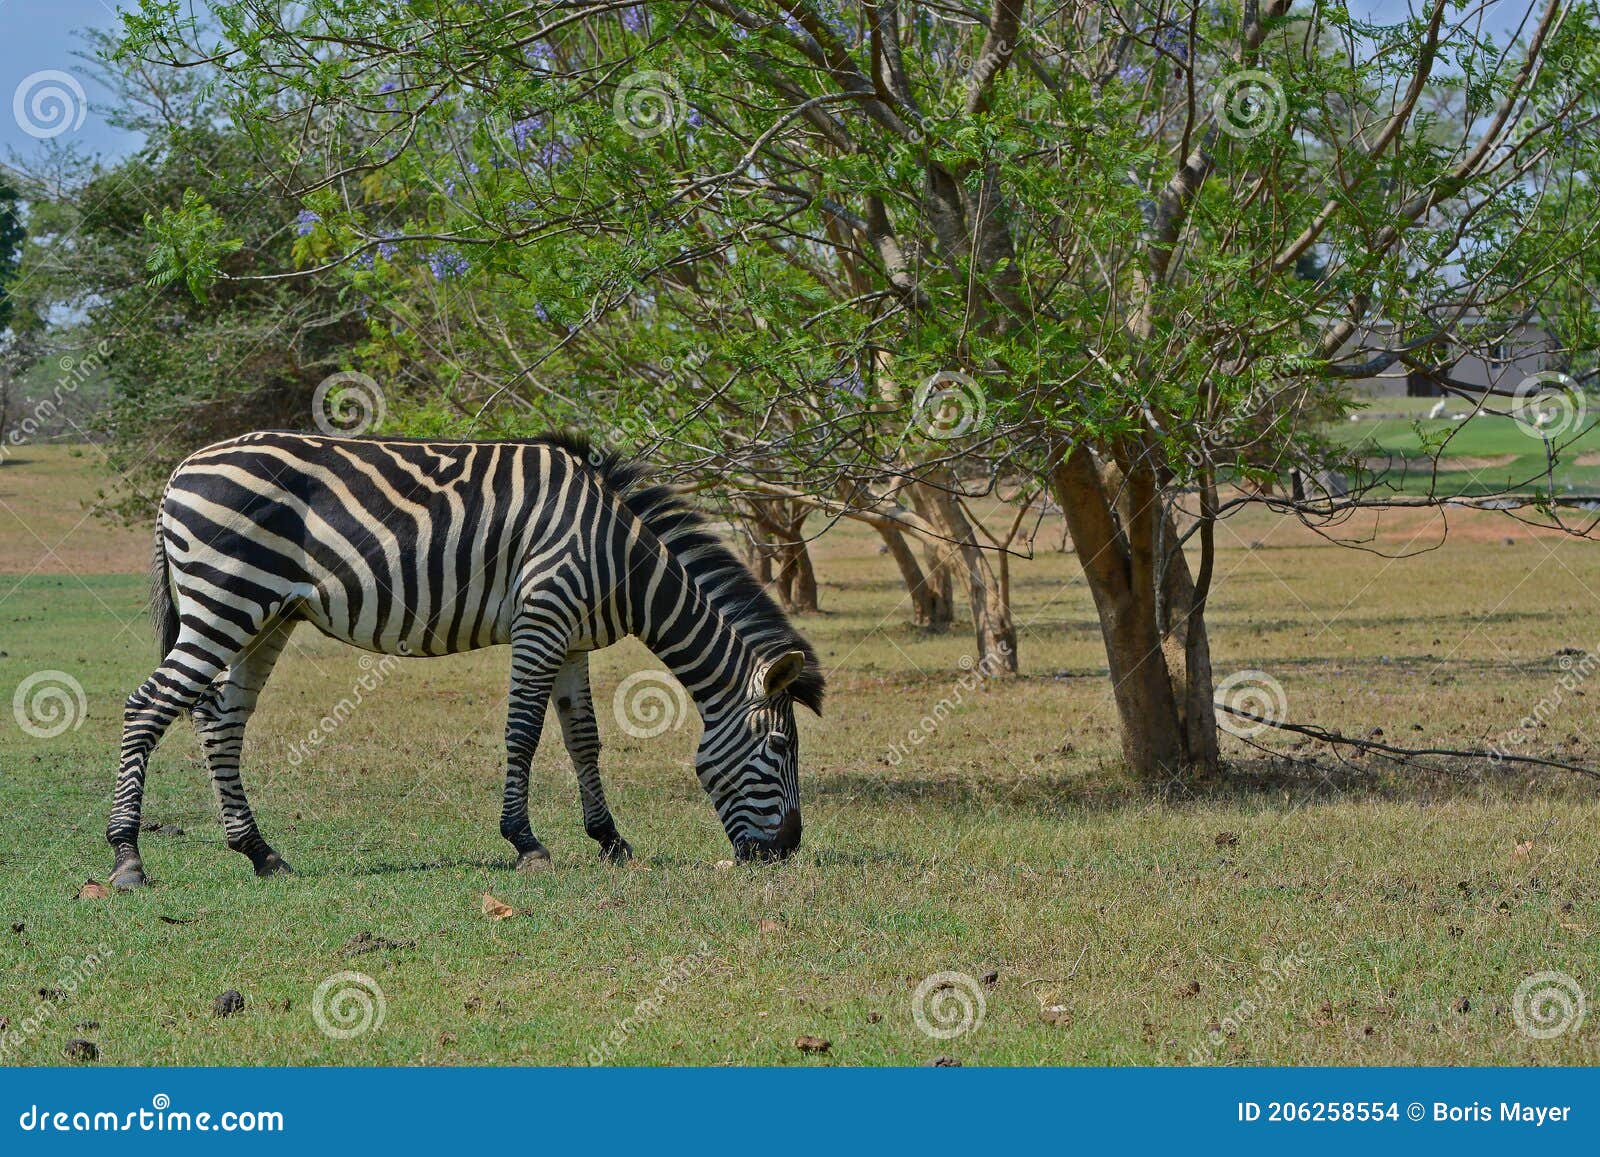 A grazing Zebra at Pazuri Outdoor Park, close by Lusaka in Zambia, Africa.